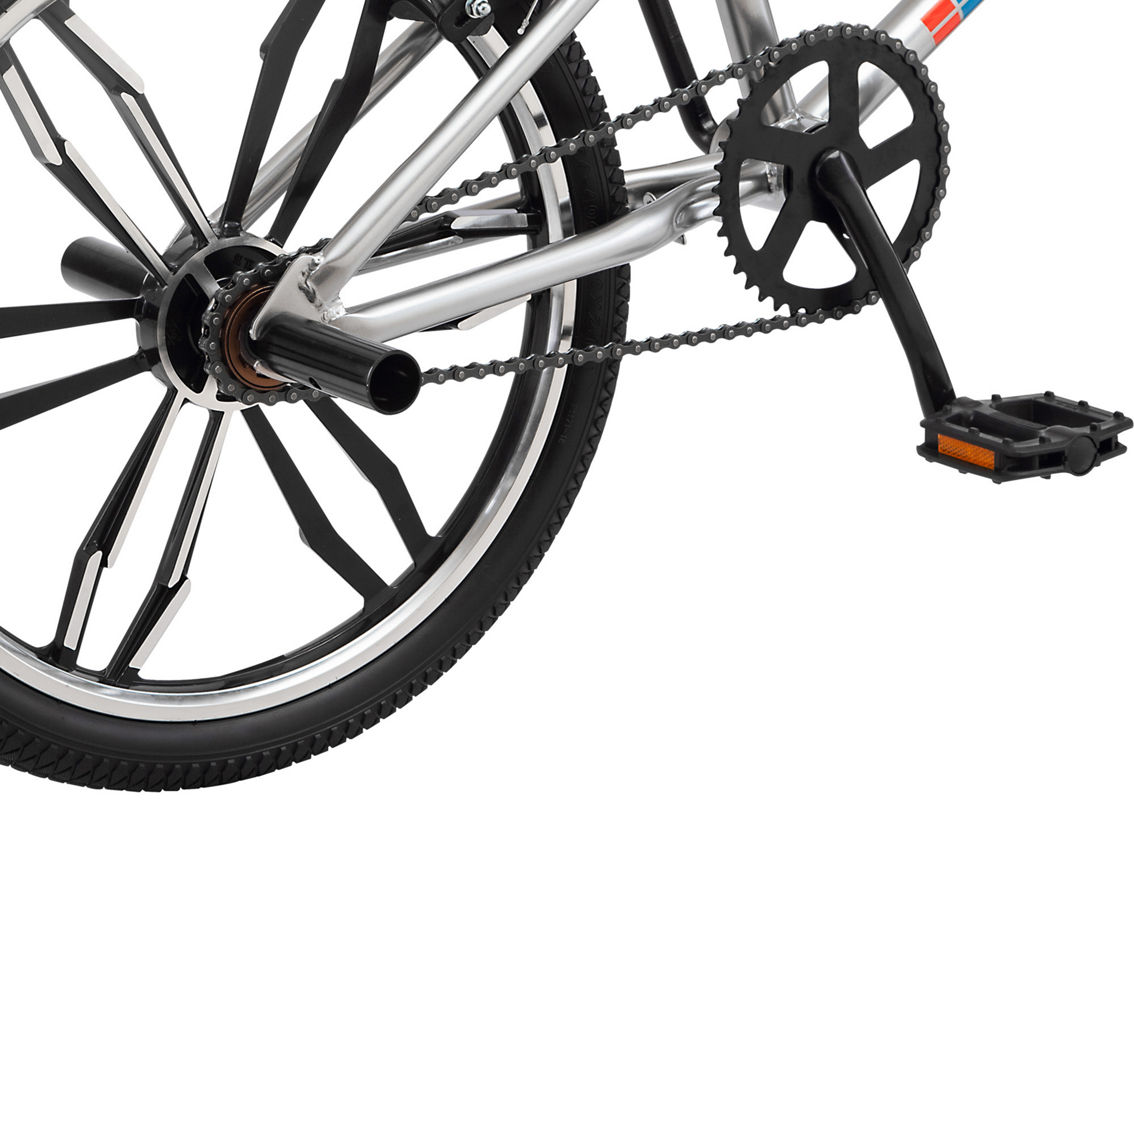 Mongoose Grid Mag 20 in. Boys BMX Freestyle Bike - Image 5 of 7